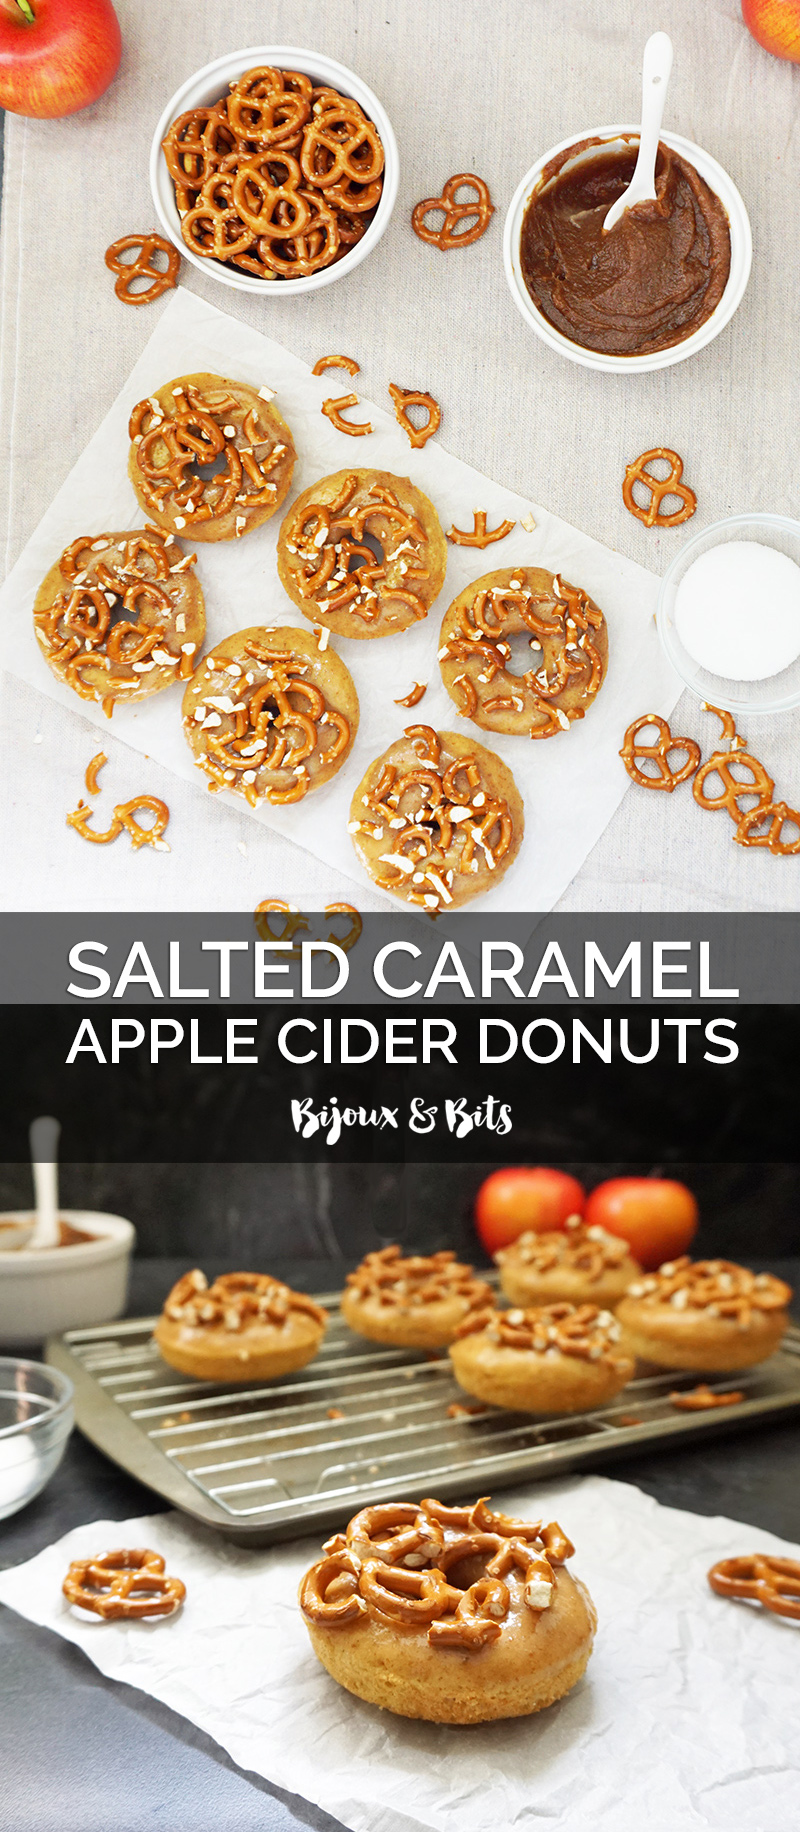 Salted caramel apple cider donuts recipe from @bijouxandbits